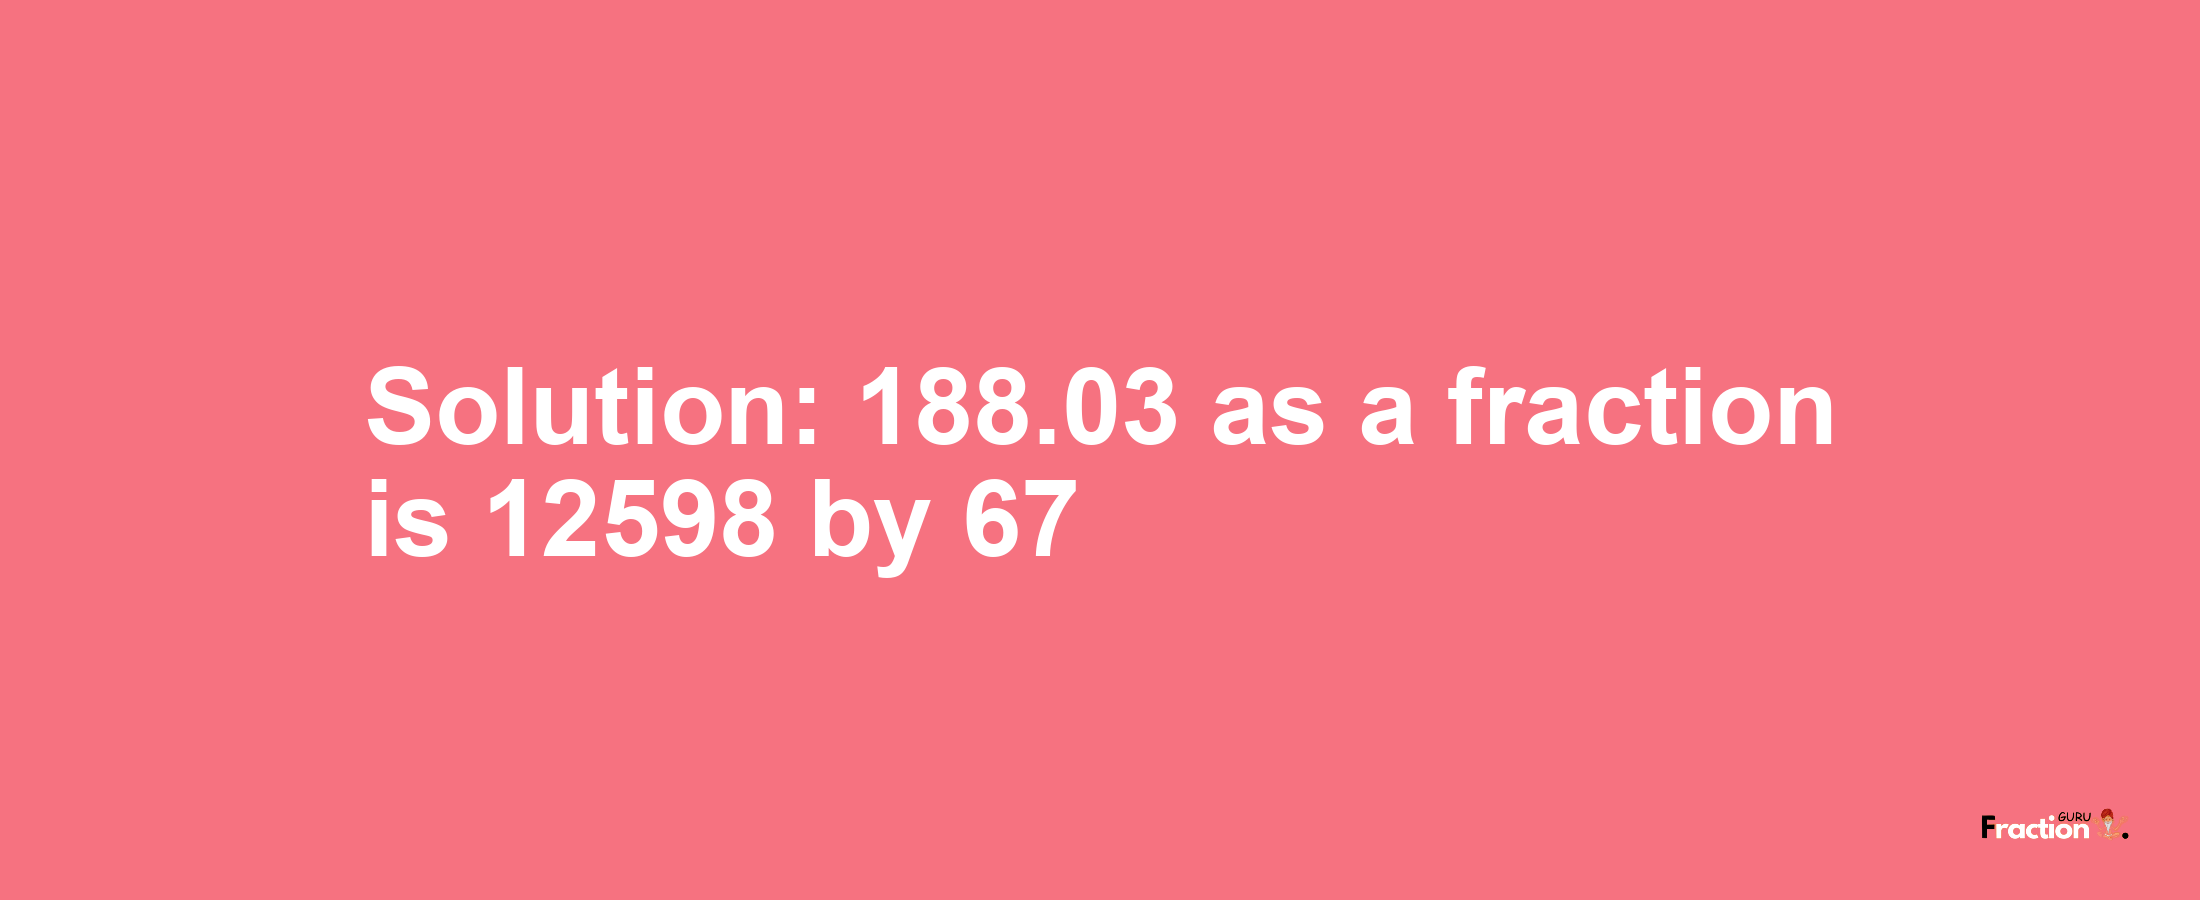 Solution:188.03 as a fraction is 12598/67